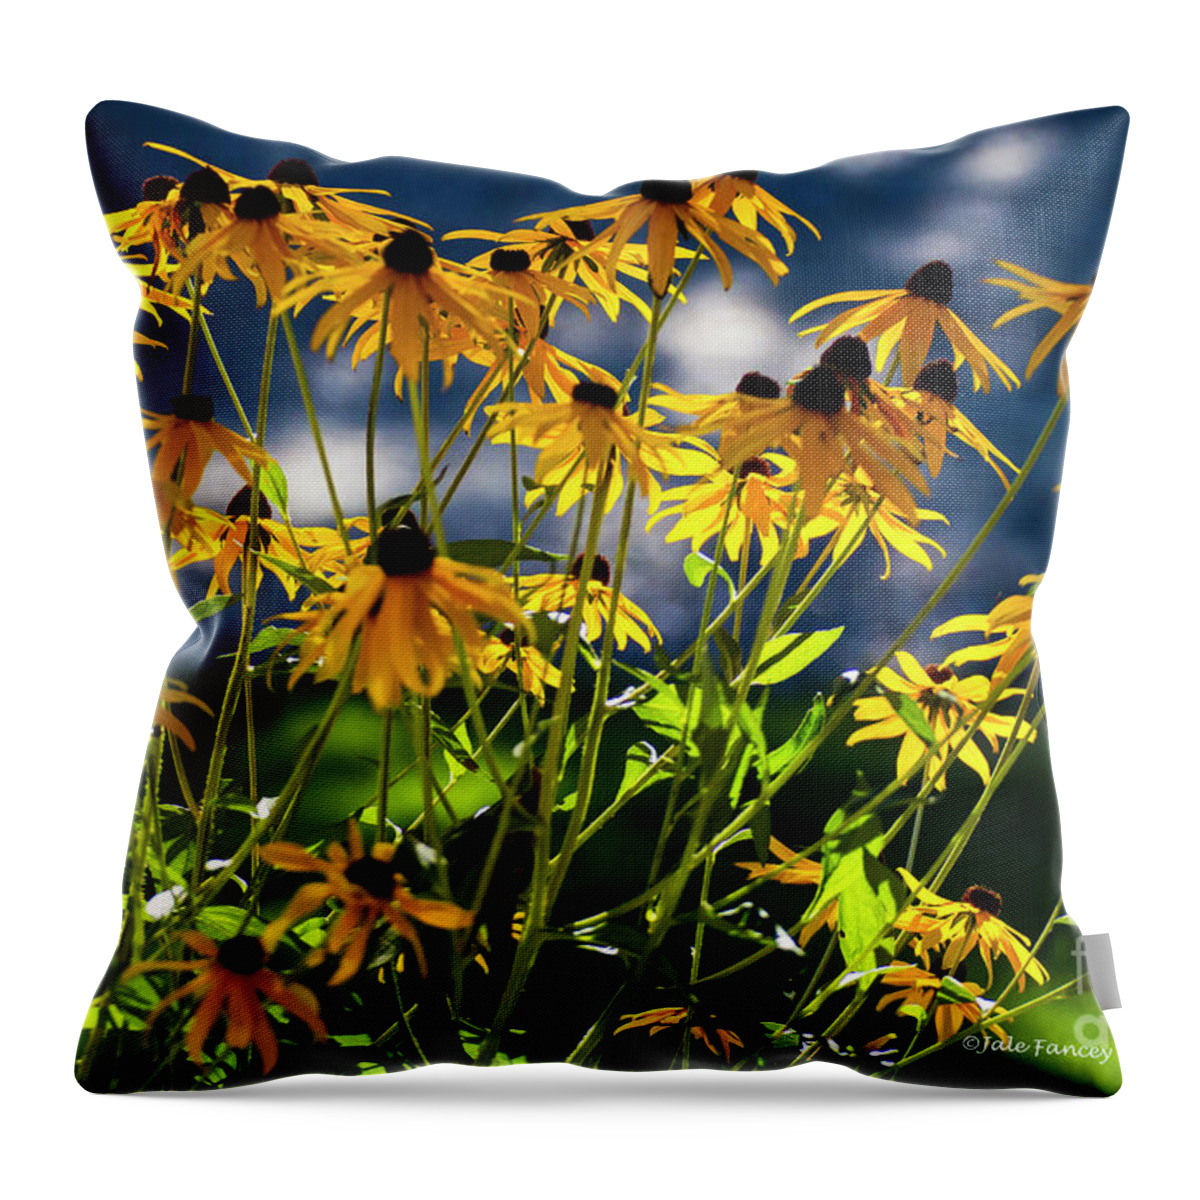 Flowers Throw Pillow featuring the photograph Reaching for the Blue Sky by Jale Fancey